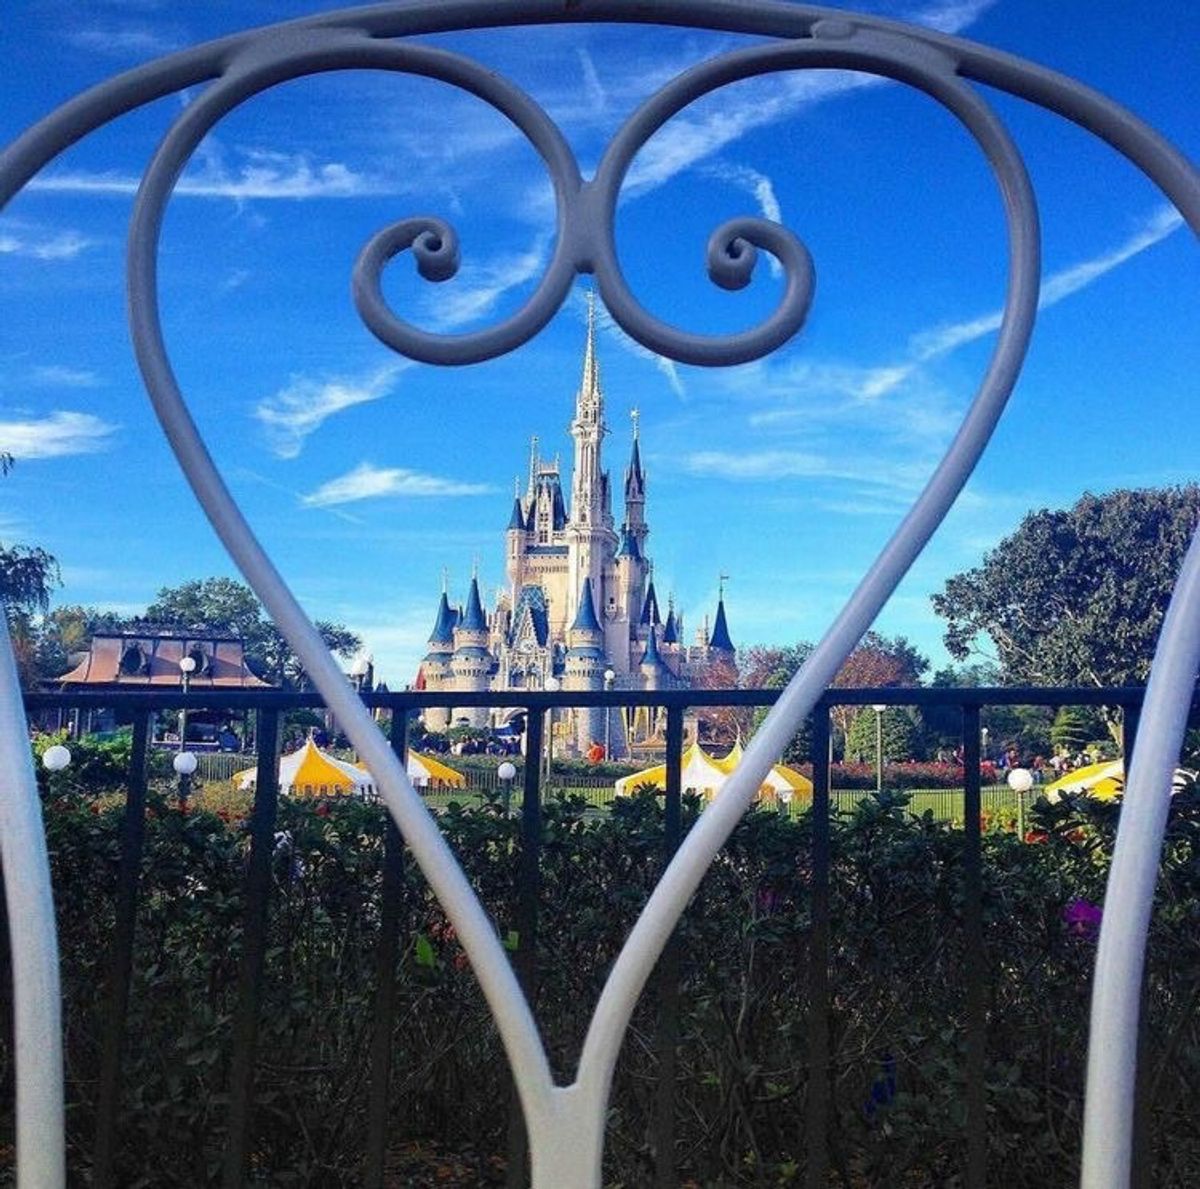 8 Signs You're Obsessed With Disney